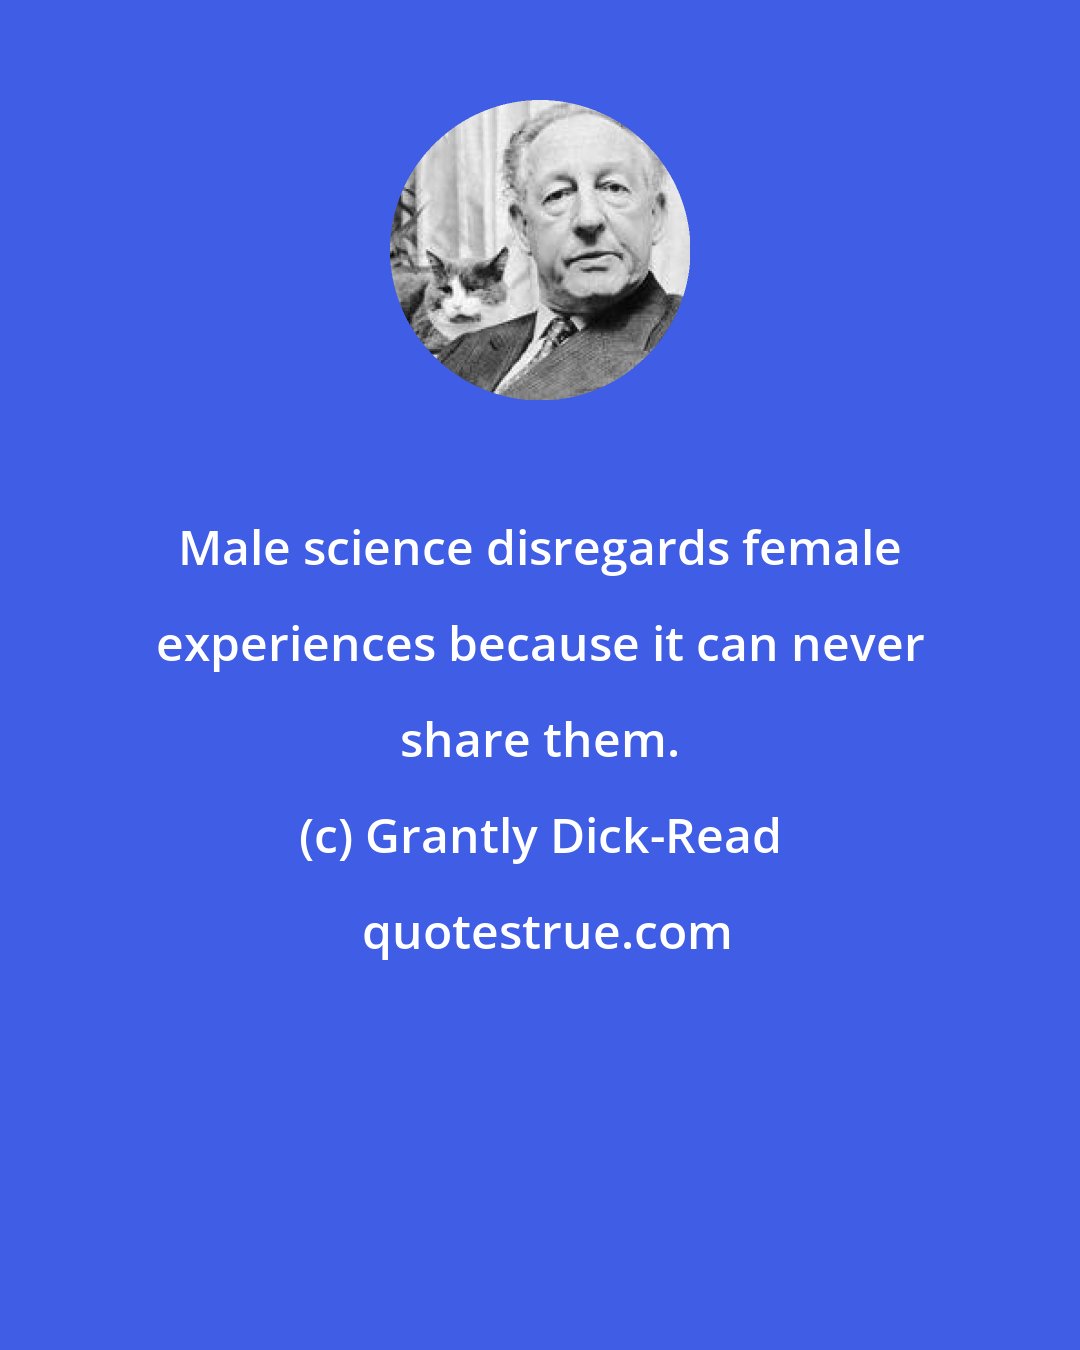 Grantly Dick-Read: Male science disregards female experiences because it can never share them.